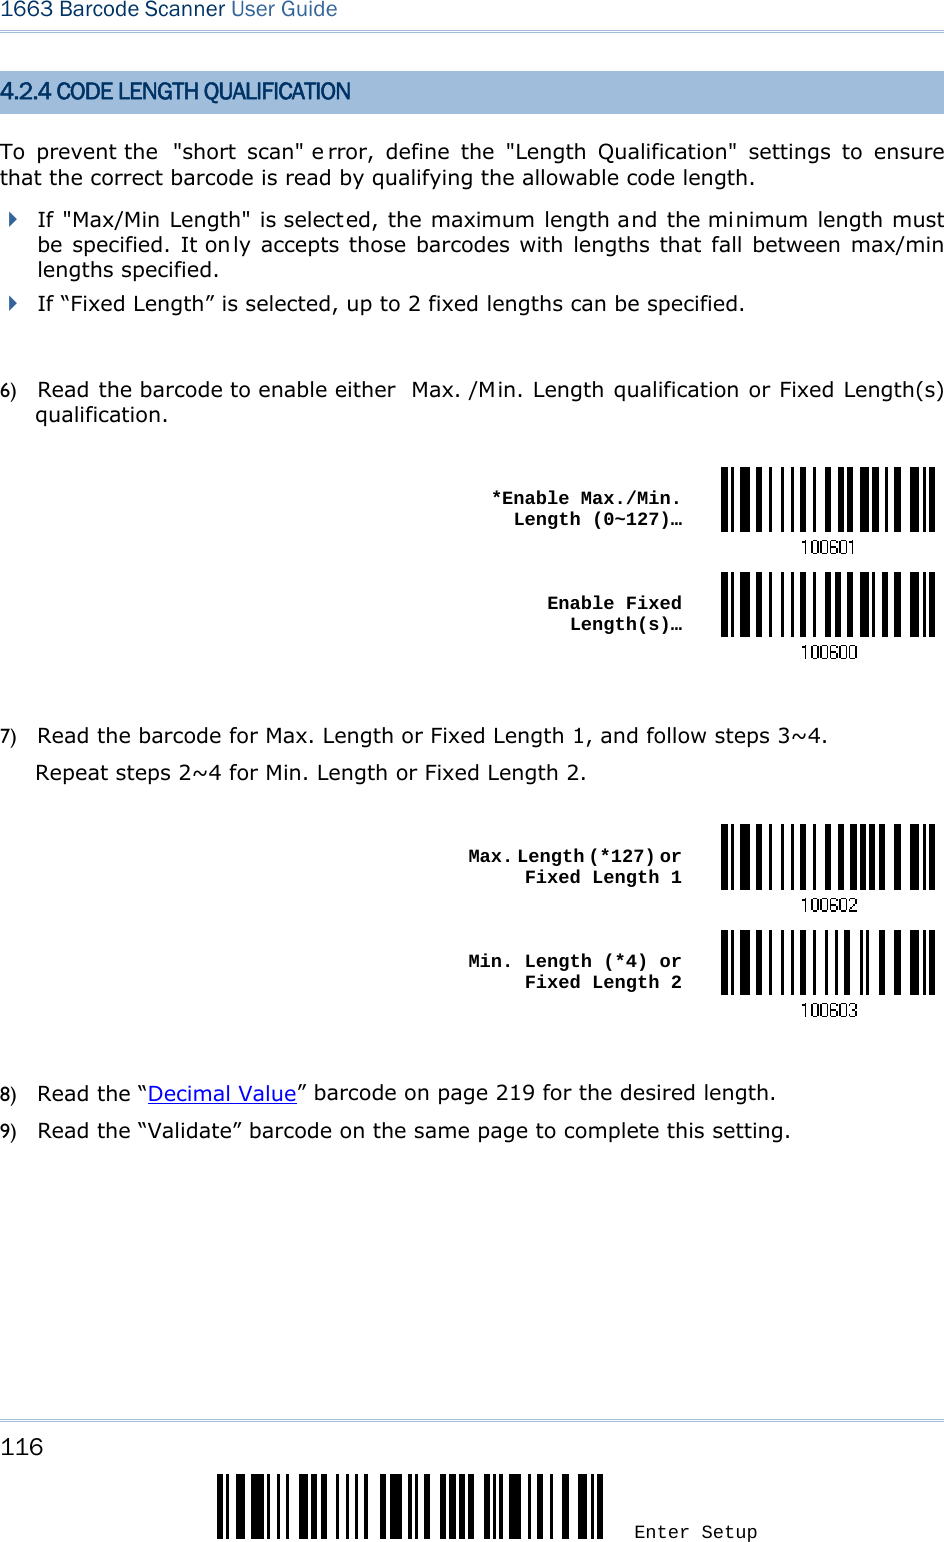 116 Enter Setup 1663 Barcode Scanner User Guide  4.2.4 CODE LENGTH QUALIFICATION To prevent the  &quot;short scan&quot; e rror, define the &quot;Length Qualification&quot; settings to ensure that the correct barcode is read by qualifying the allowable code length.  If &quot;Max/Min Length&quot; is selected, the maximum length and the minimum length must be specified. It on ly accepts those barcodes with lengths that fall between max/min lengths specified.  If “Fixed Length” is selected, up to 2 fixed lengths can be specified.  6) Read the barcode to enable either  Max. /Min. Length qualification or Fixed Length(s) qualification.   *Enable Max./Min. Length (0~127)… Enable Fixed Length(s)… 7) Read the barcode for Max. Length or Fixed Length 1, and follow steps 3~4. Repeat steps 2~4 for Min. Length or Fixed Length 2.   Max. Length (*127) or Fixed Length 1 Min. Length (*4) or Fixed Length 2 8) Read the “Decimal Value” barcode on page 219 for the desired length.   9) Read the “Validate” barcode on the same page to complete this setting.   